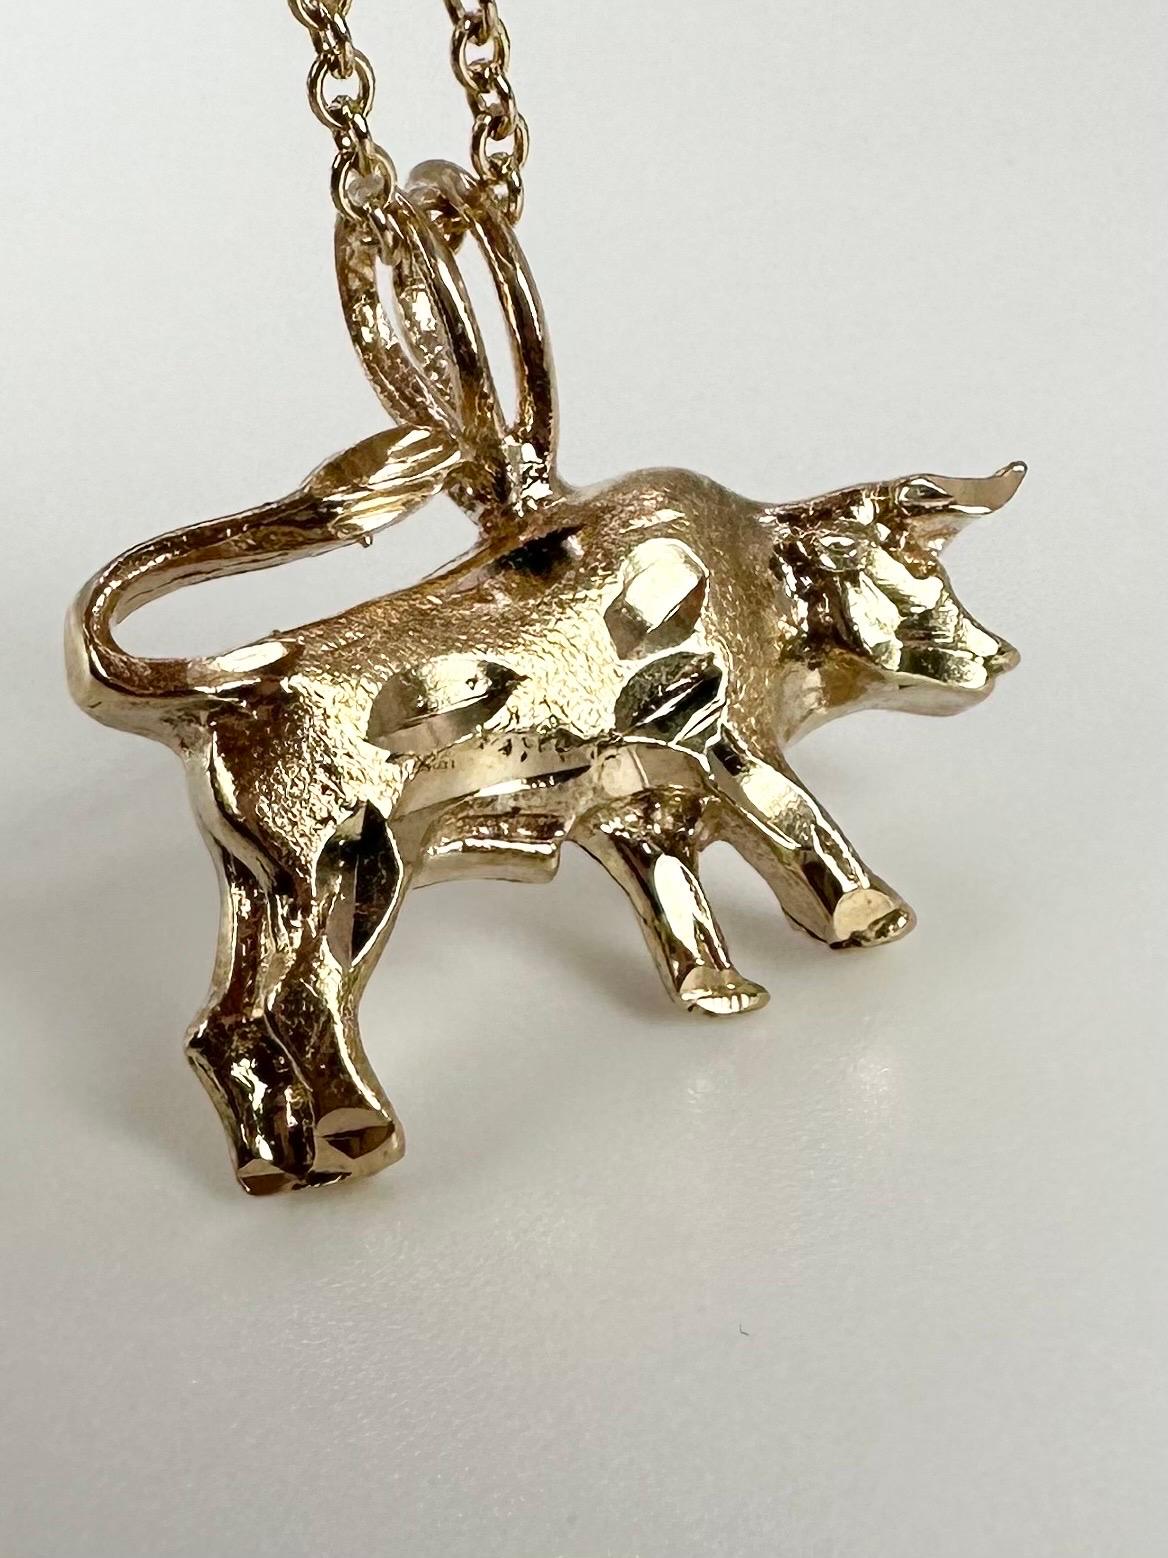 Bull pendant necklace in 14KT yellow gold, comes with 18 inches chain! 
GOLD: 14KT gold
Grams:2.77
size: 18 inches chain
Item#: 435-00042MTE

WHAT YOU GET AT STAMPAR JEWELERS:
Stampar Jewelers, located in the heart of Jupiter, Florida, is a custom